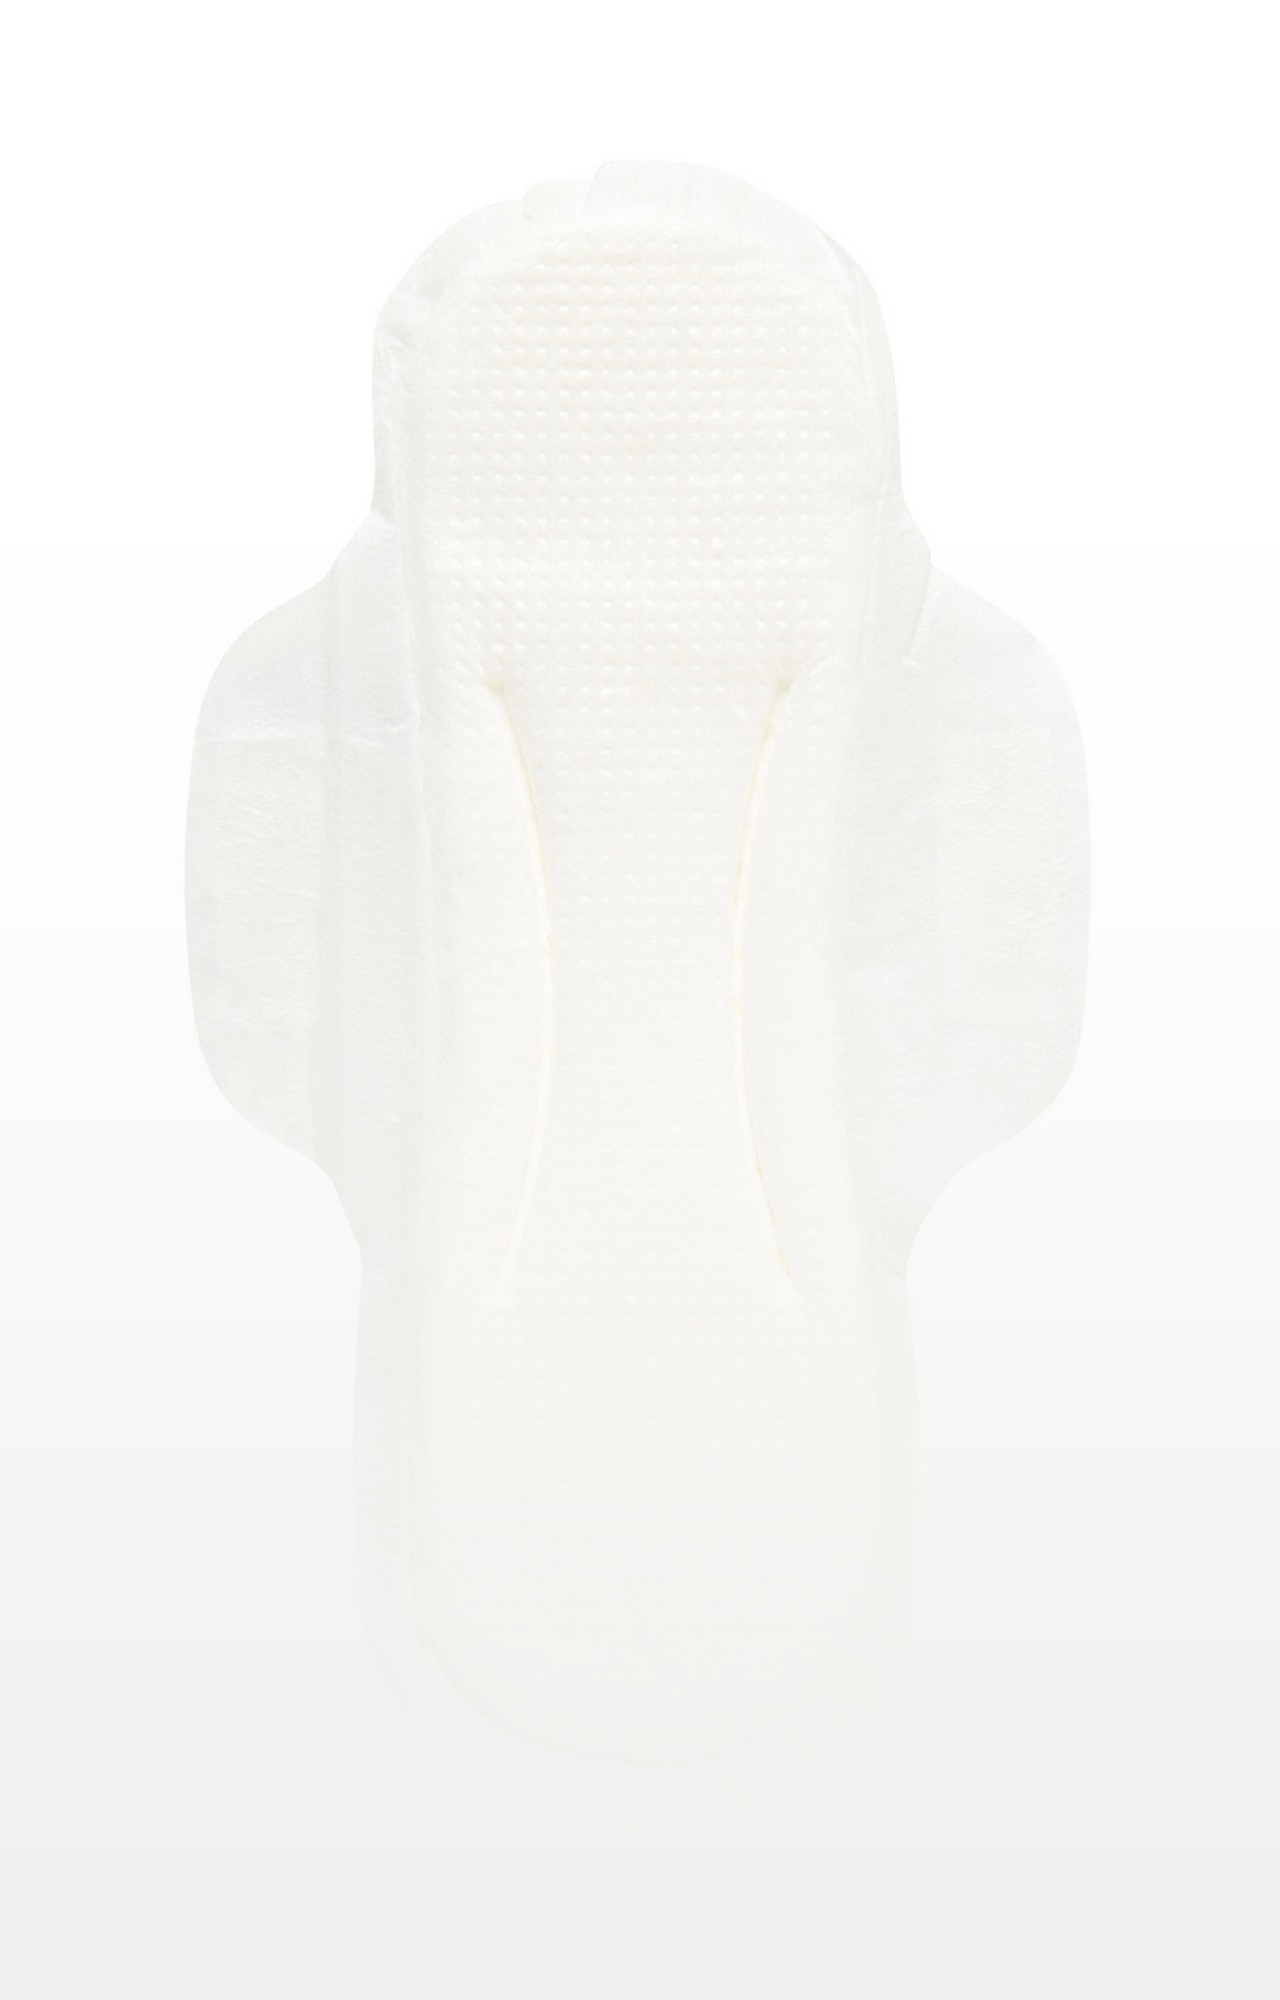 Mothercare | White Maternity Towels with Wings - Pack of 24 1